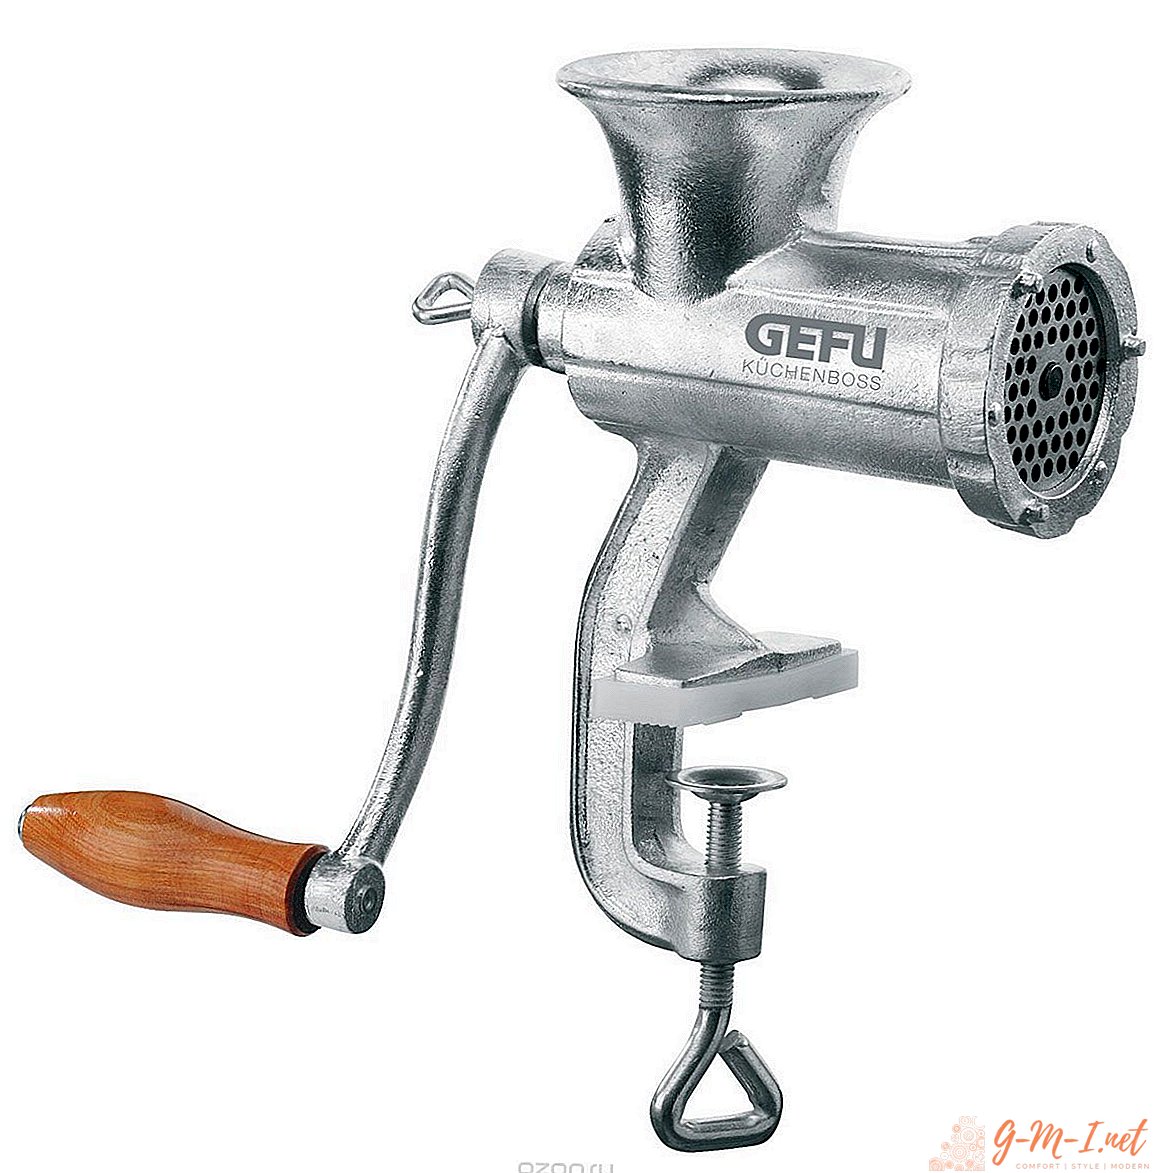 How to assemble a manual meat grinder